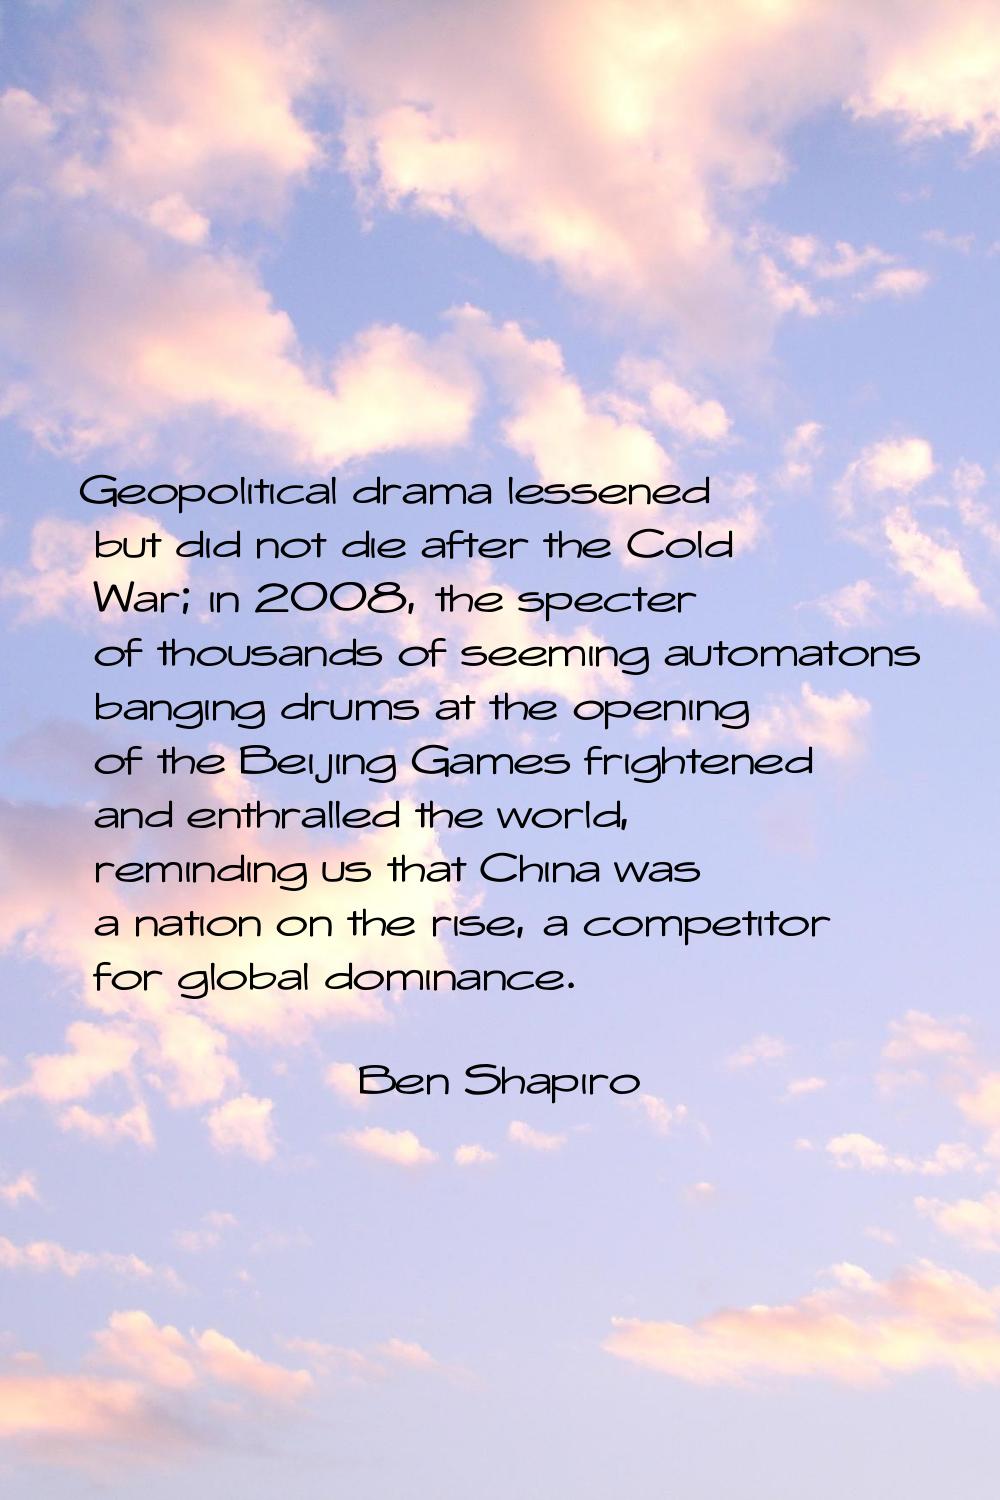 Geopolitical drama lessened but did not die after the Cold War; in 2008, the specter of thousands o